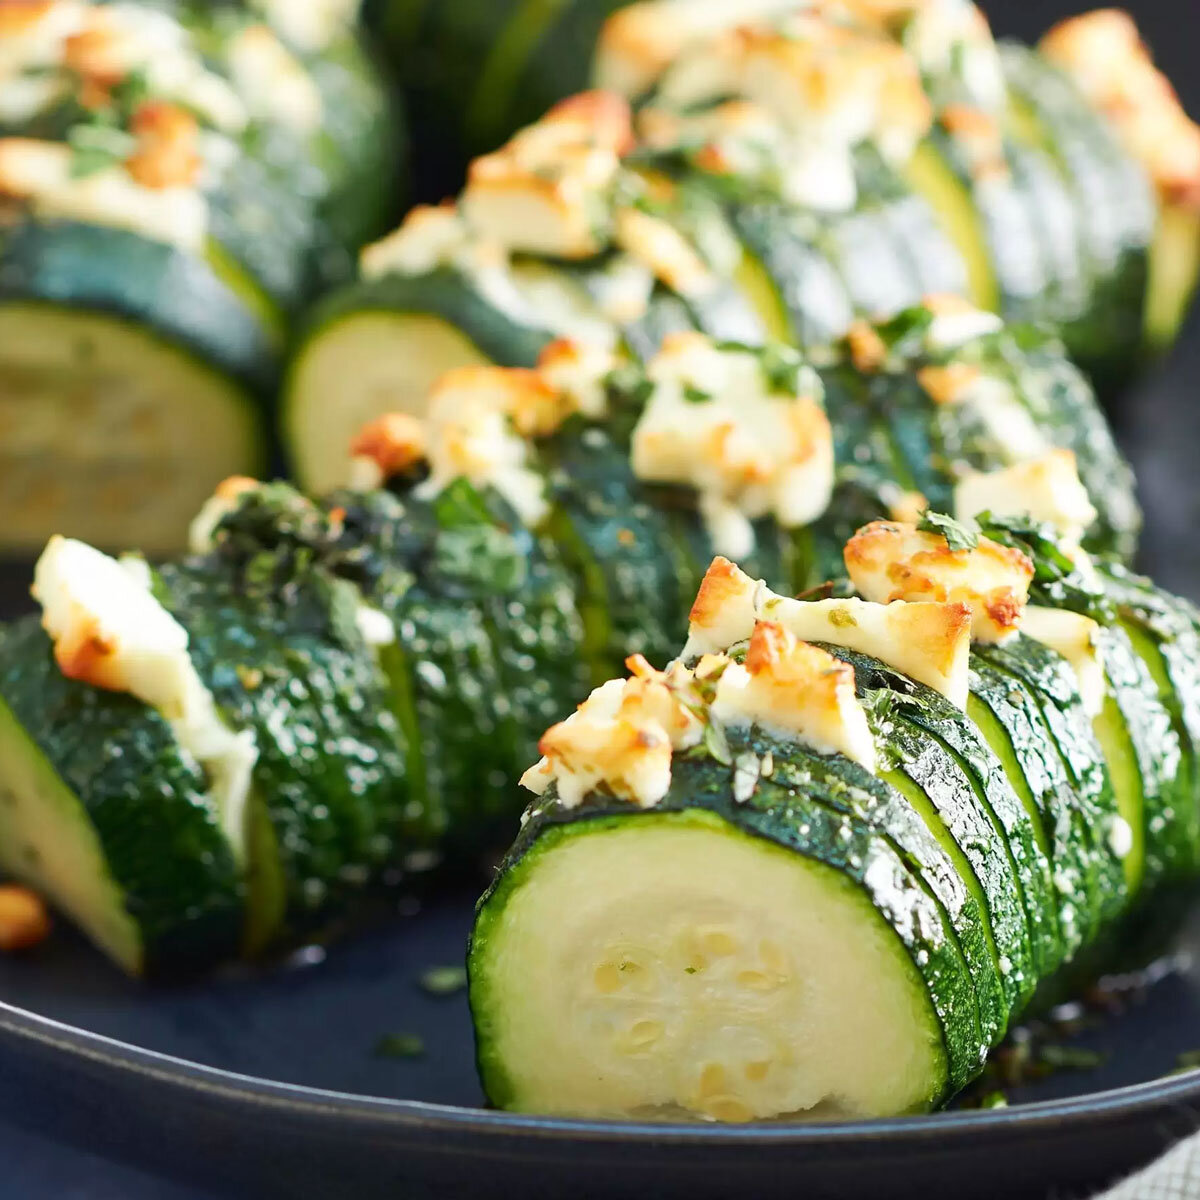 Organic Courgettes